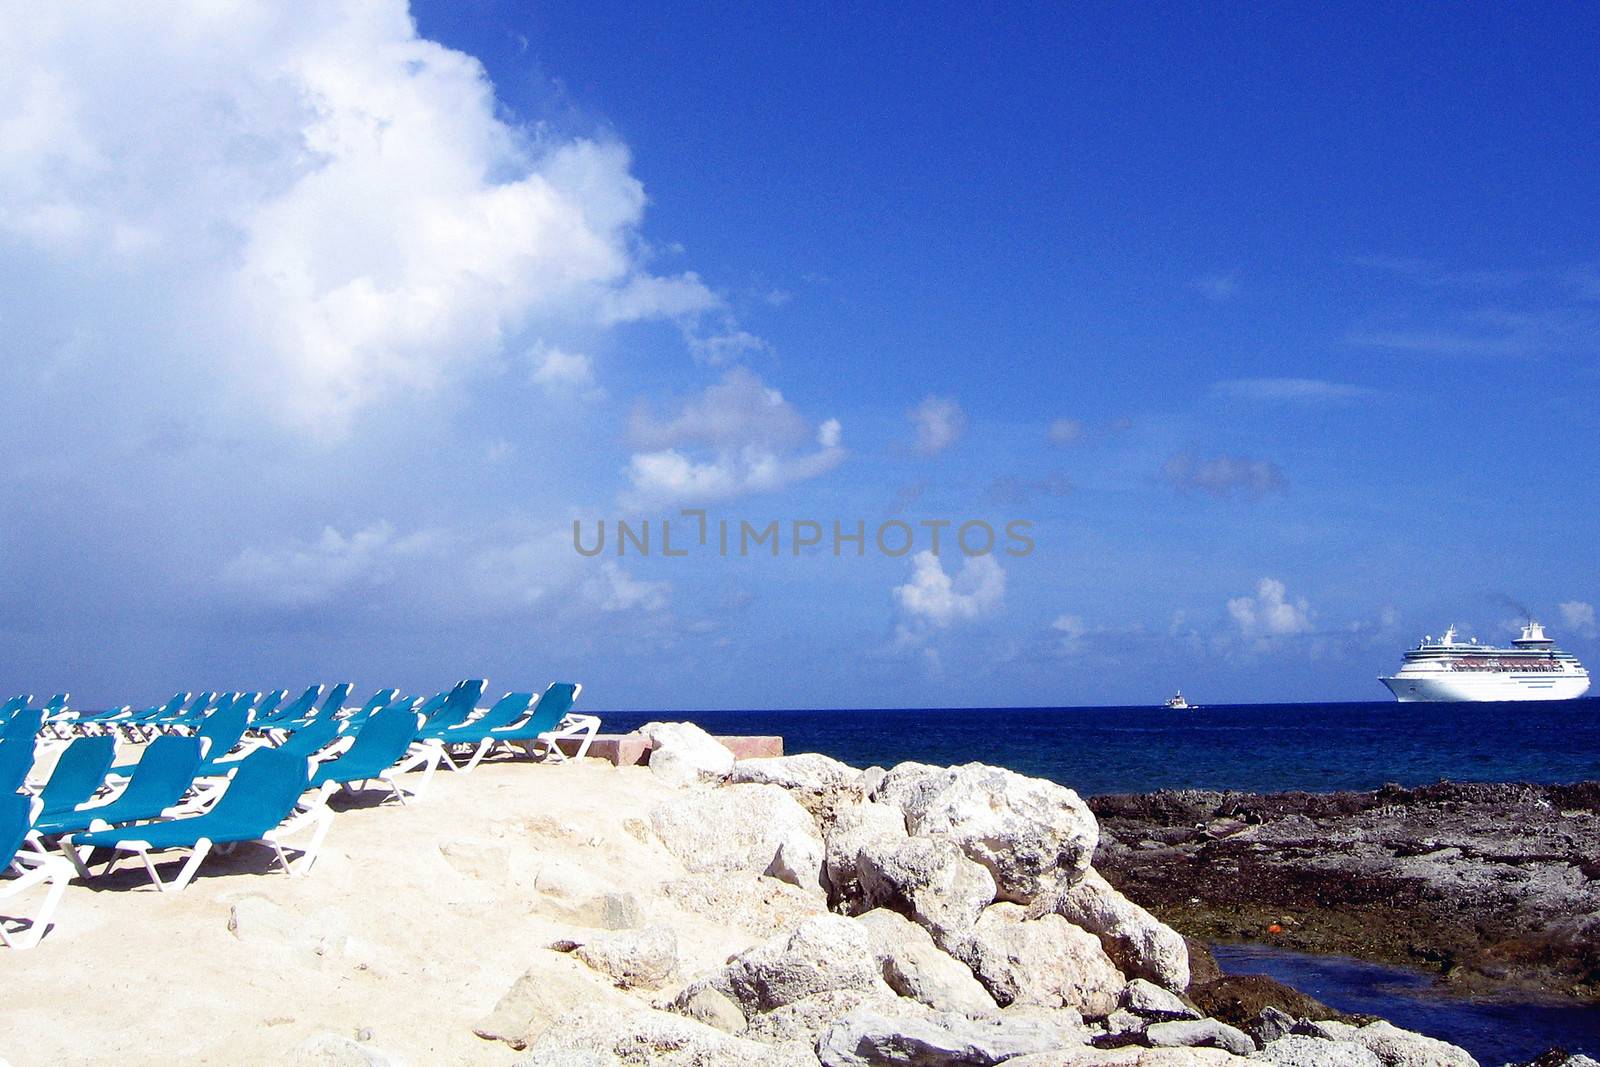 Empty beach chairs on rocky coastline with cruise ship sailing in blue sea background.